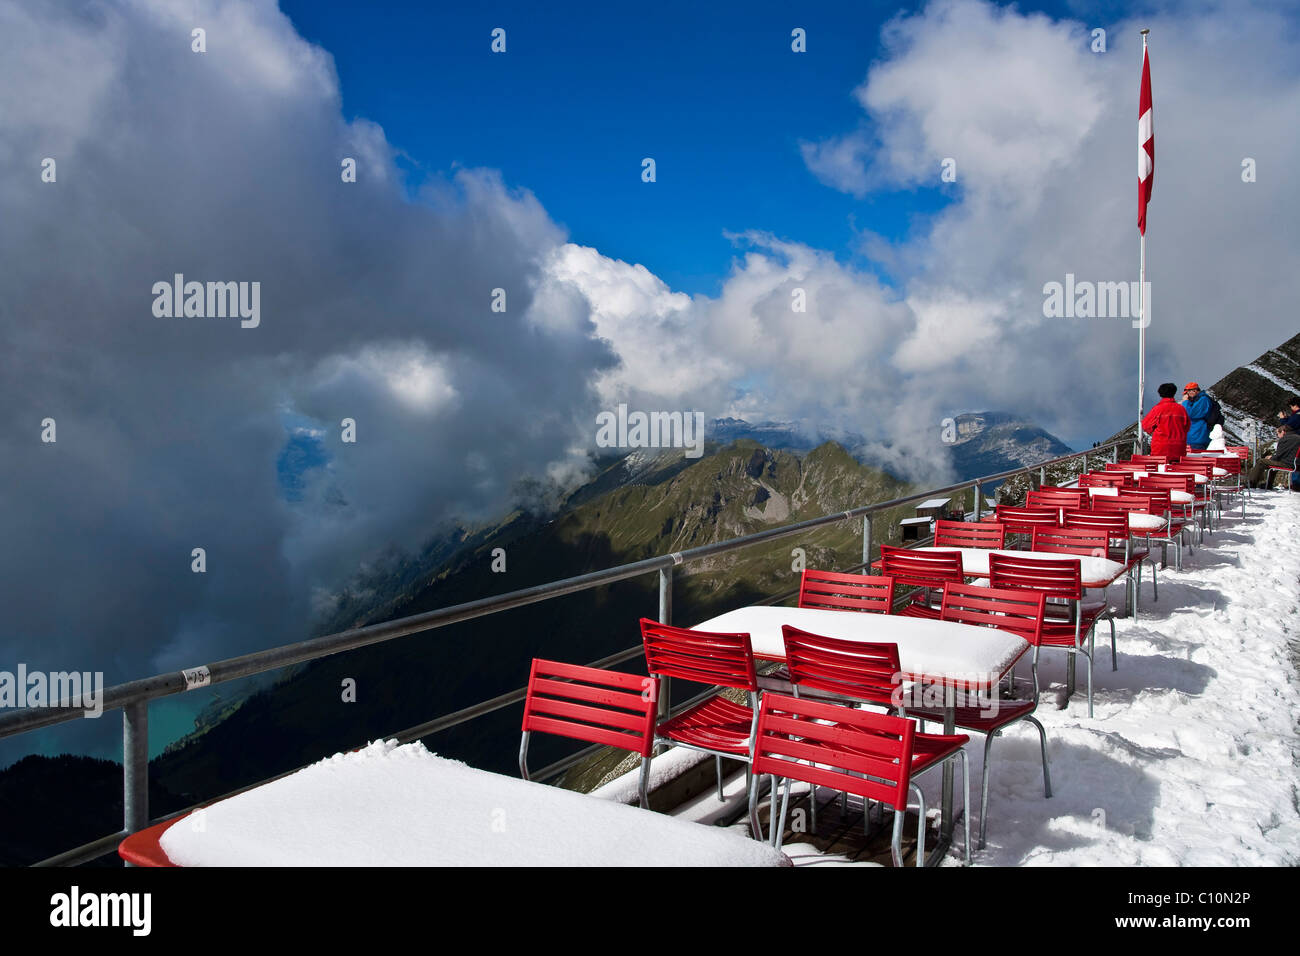 Terrace of the Rothorn Kulm mountain hotel on Mt. Brienzer Rothorn, Bernese Oberland, Switzerland, Europe Stock Photo